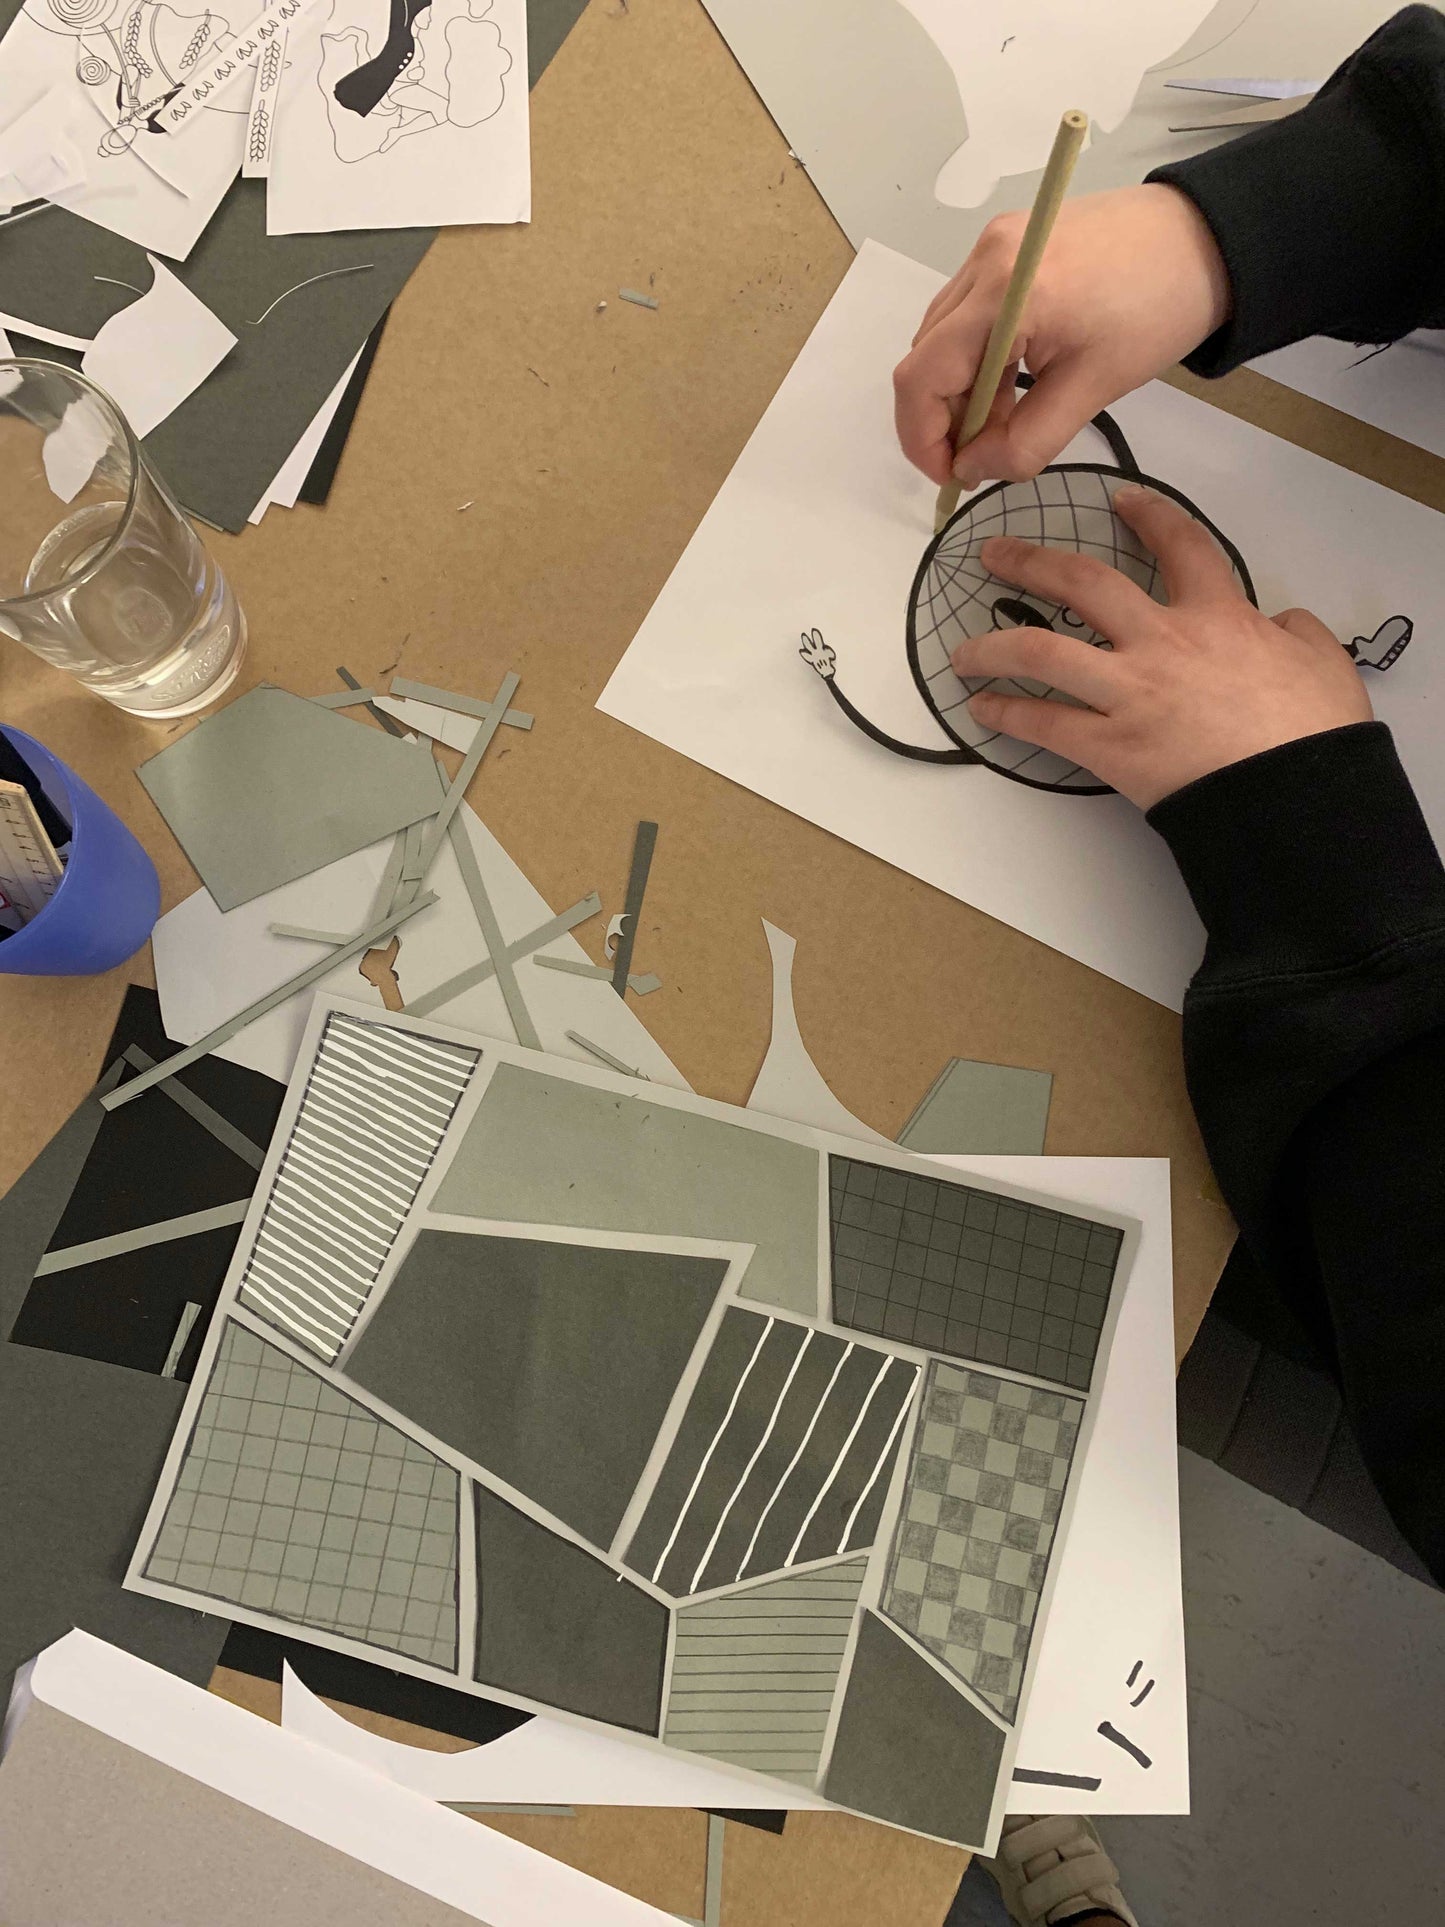 "Copy + Taste" – Risography Printing Workshop with Eva in Cologne, Germany